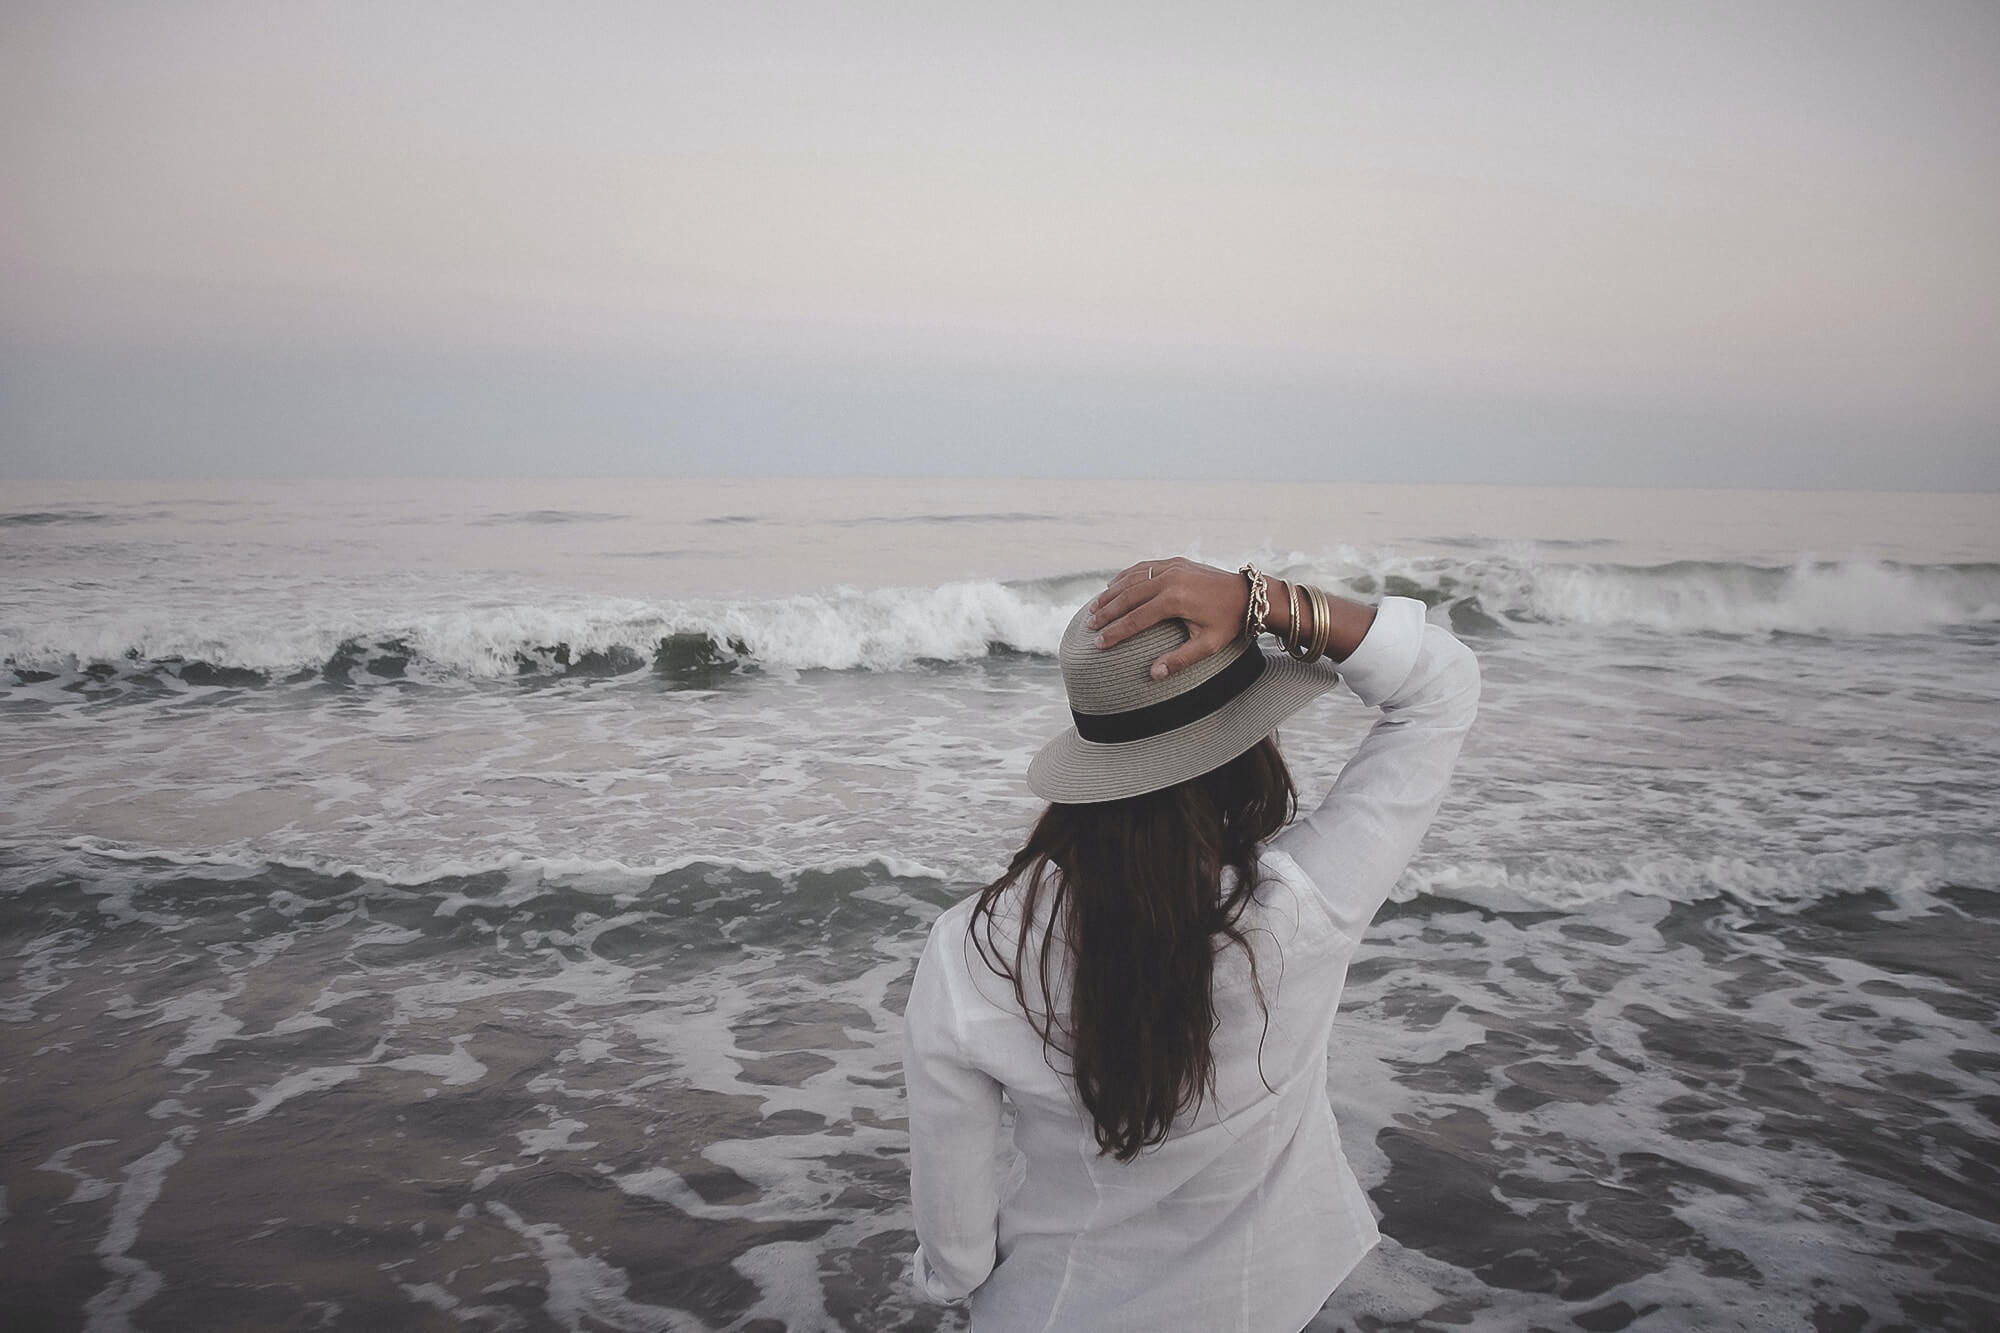 Image of a woman wearing a hat standing on the beach looking at the ocean on a cloudy day. Do you struggle with grief? Learn how grief counseling in Saint Petersburg, FL can help you cope in healthy ways.